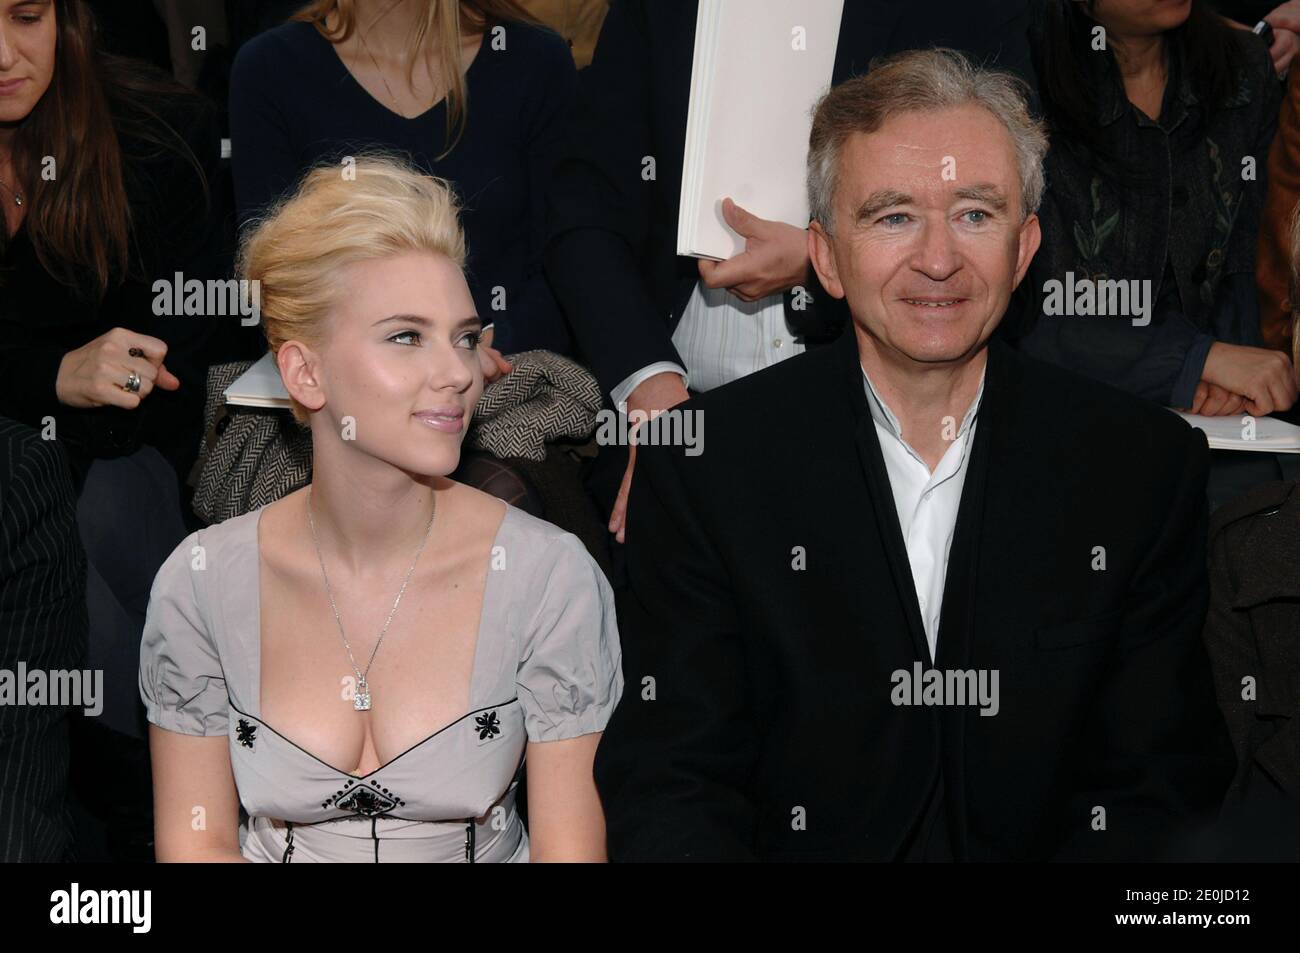 U.S. actress Sharon Stone poses surrounded by LVMH CEO Bernard Arnault (L)  and French Minister of Culture Renaud Donnedieu de Vabres upon arrival to  the cocktail reception for the inauguration of the